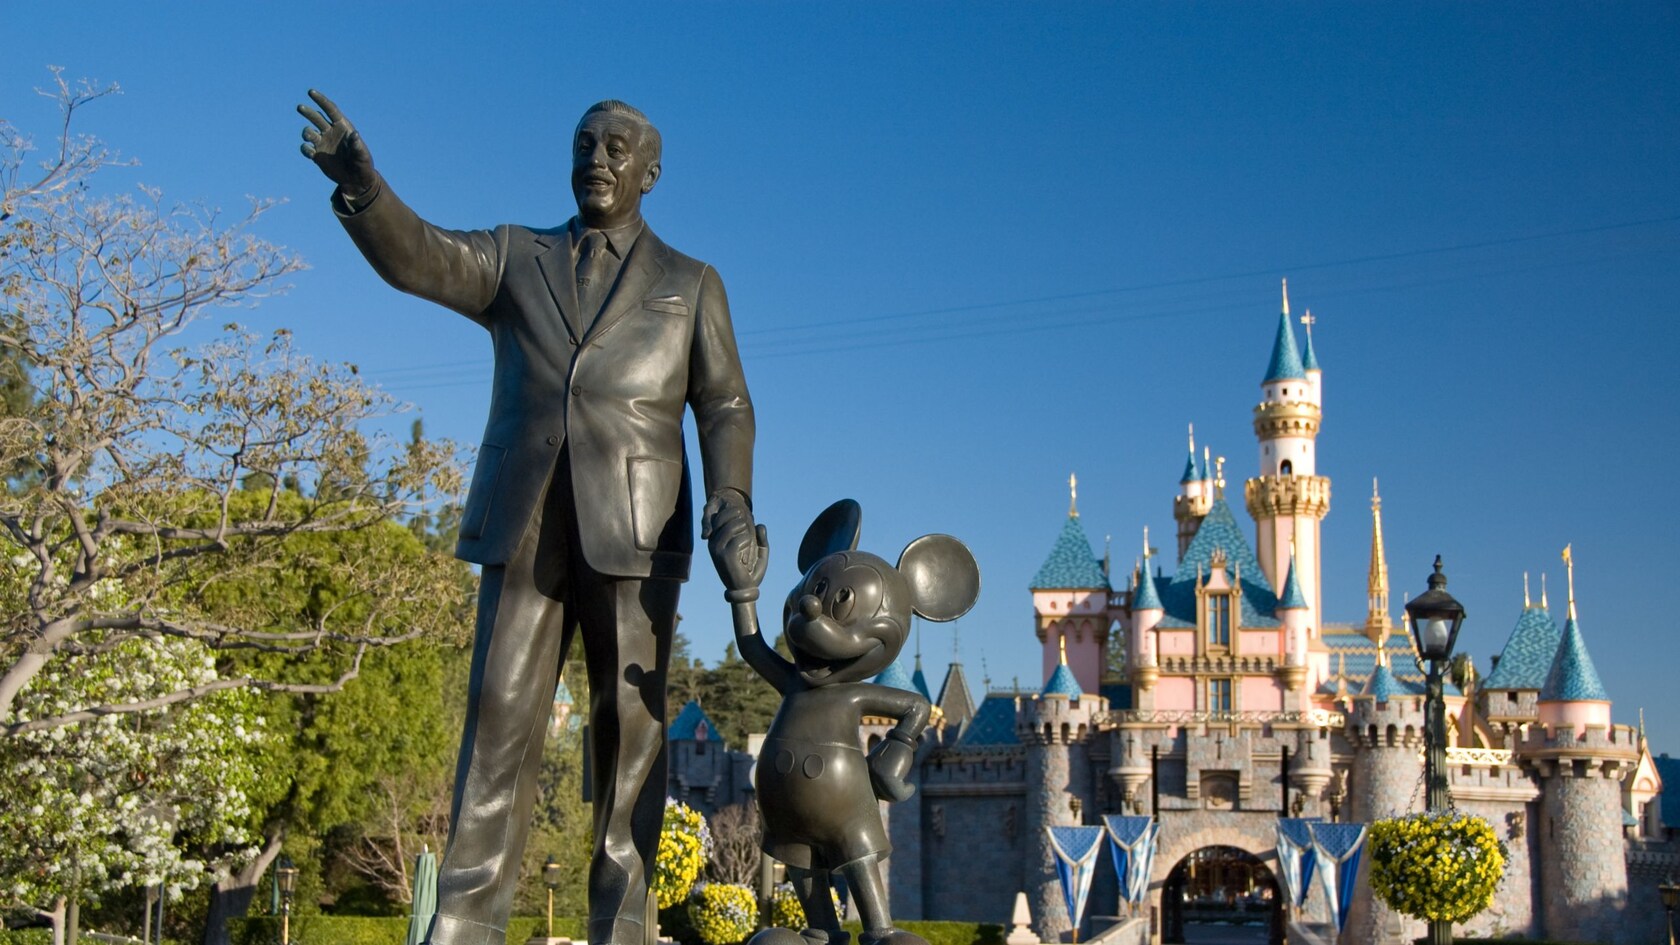 A statue of Walt Disney and Mickey Mouse in front of Sleeping Beauty Castle in Disneyland Park